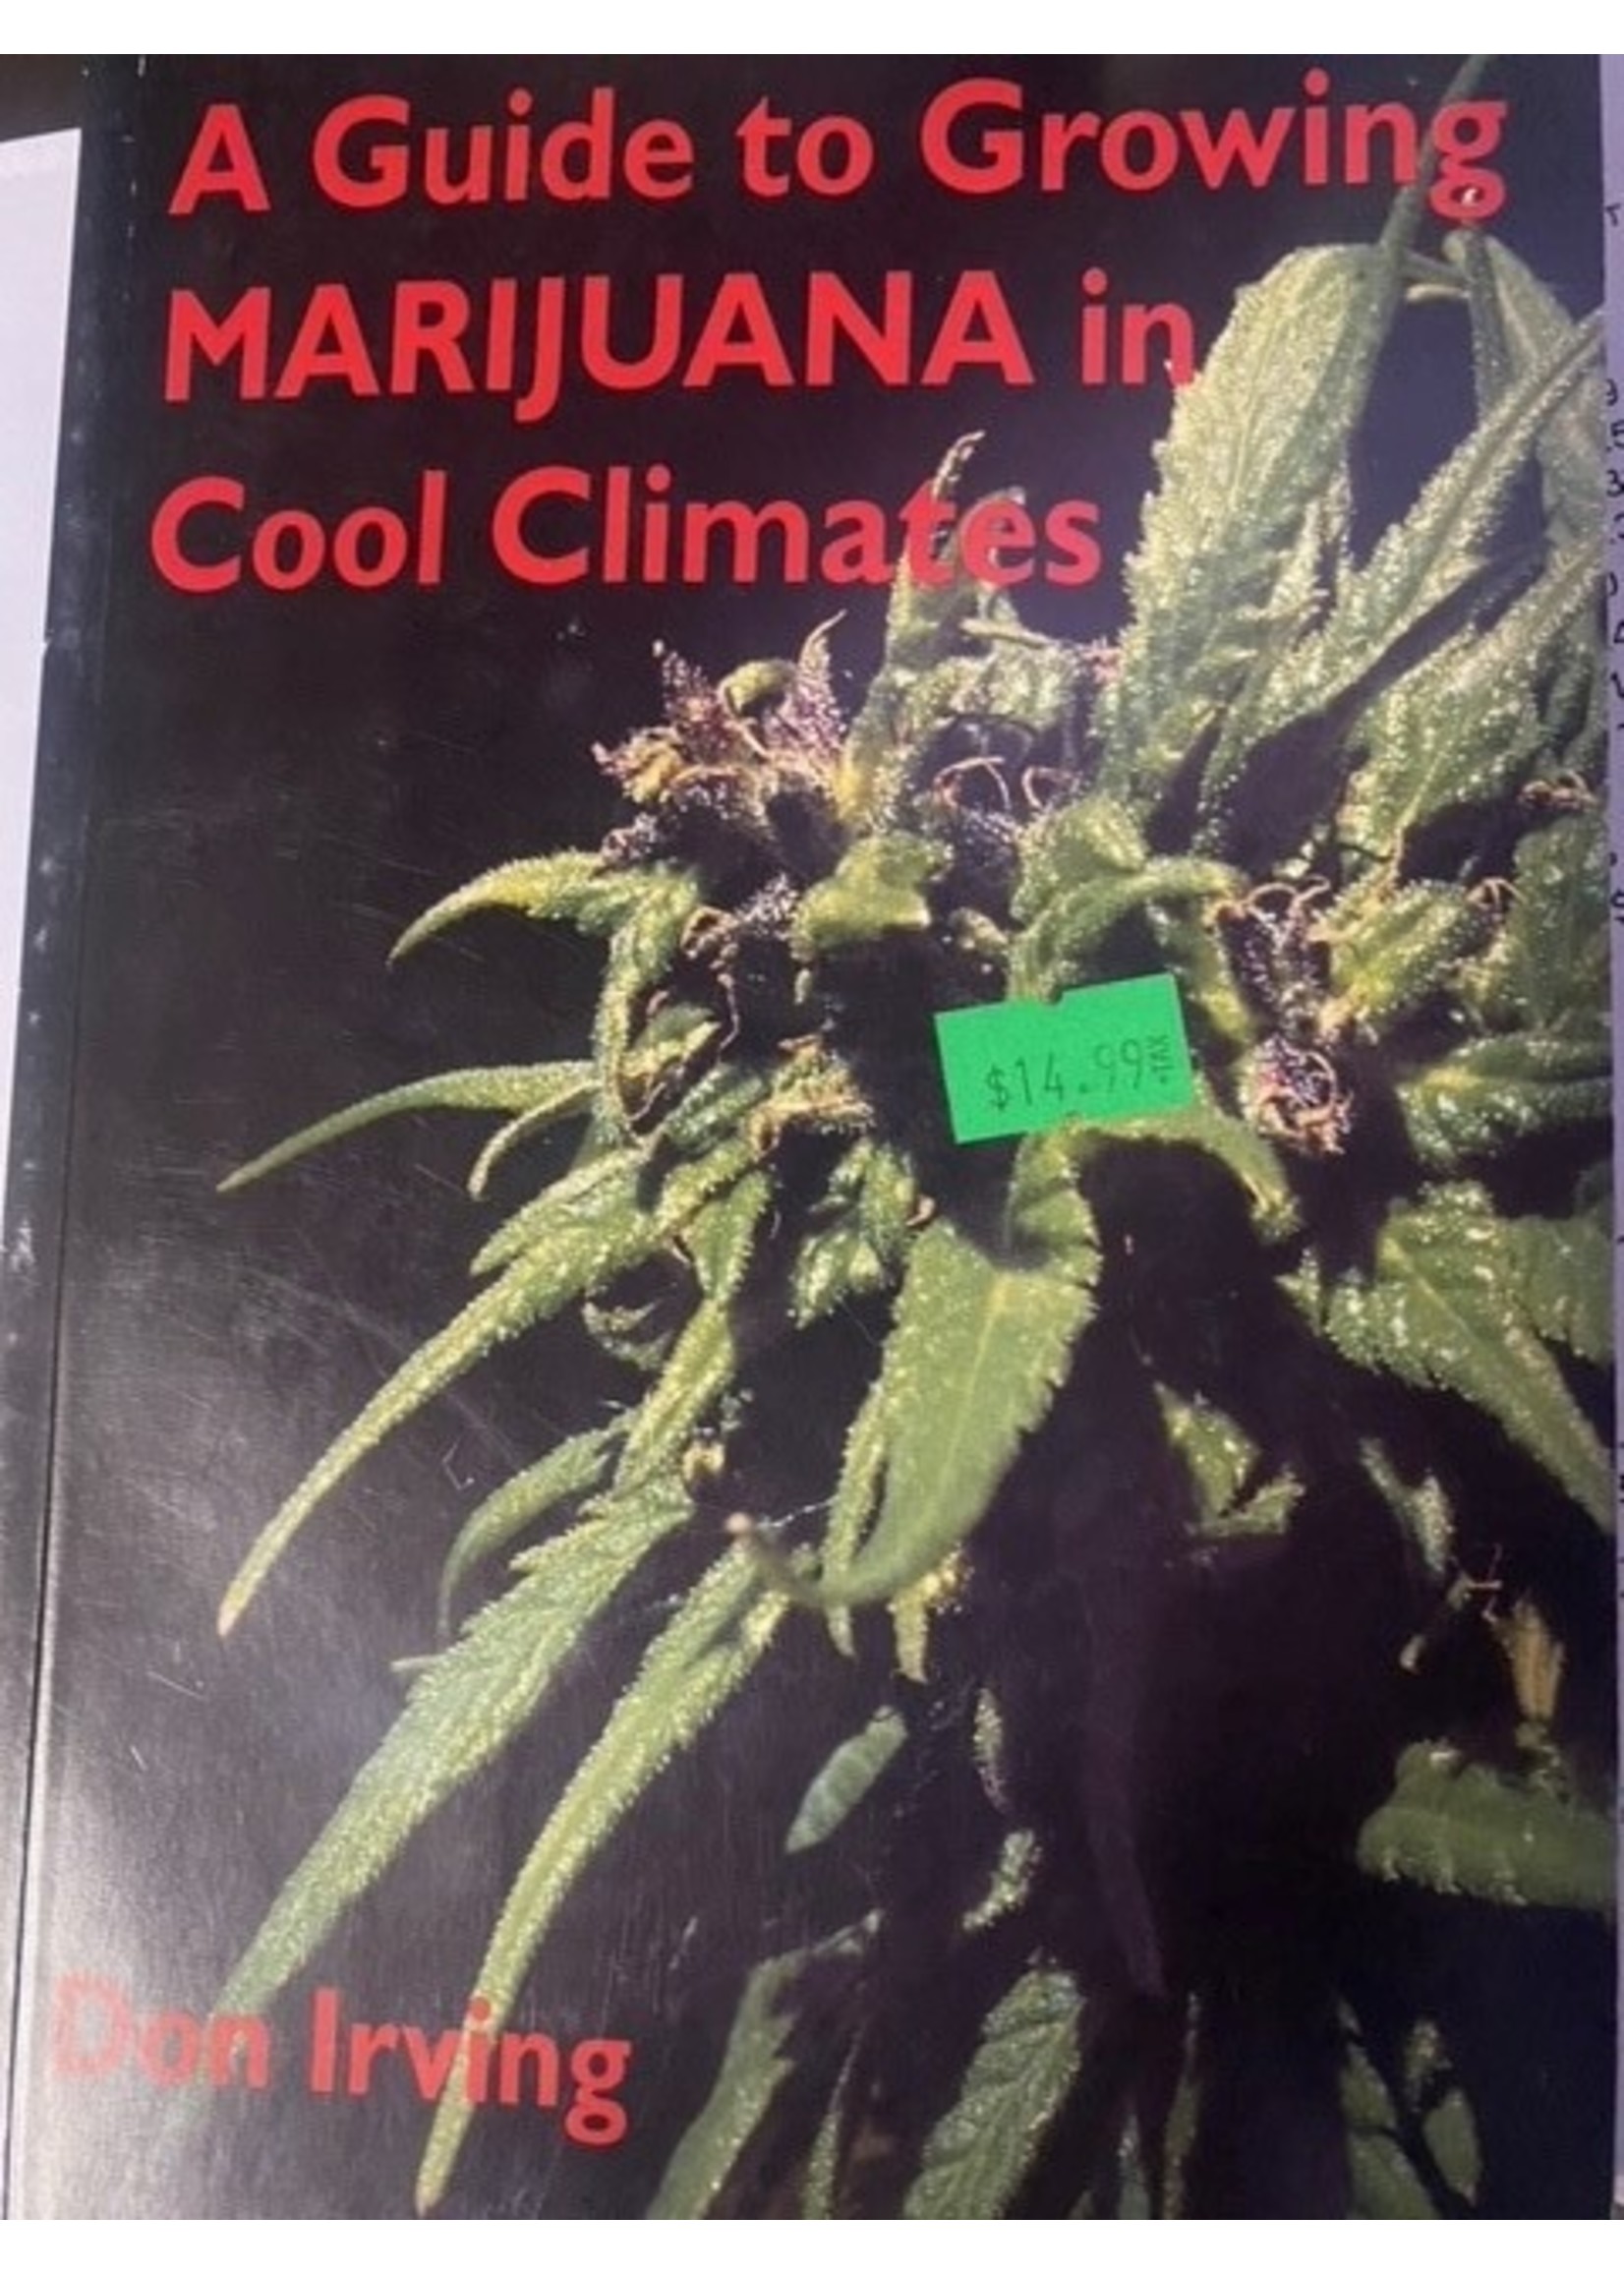 A Guide to Growing MARIJUANA in Cool Climates Book By Don Irving